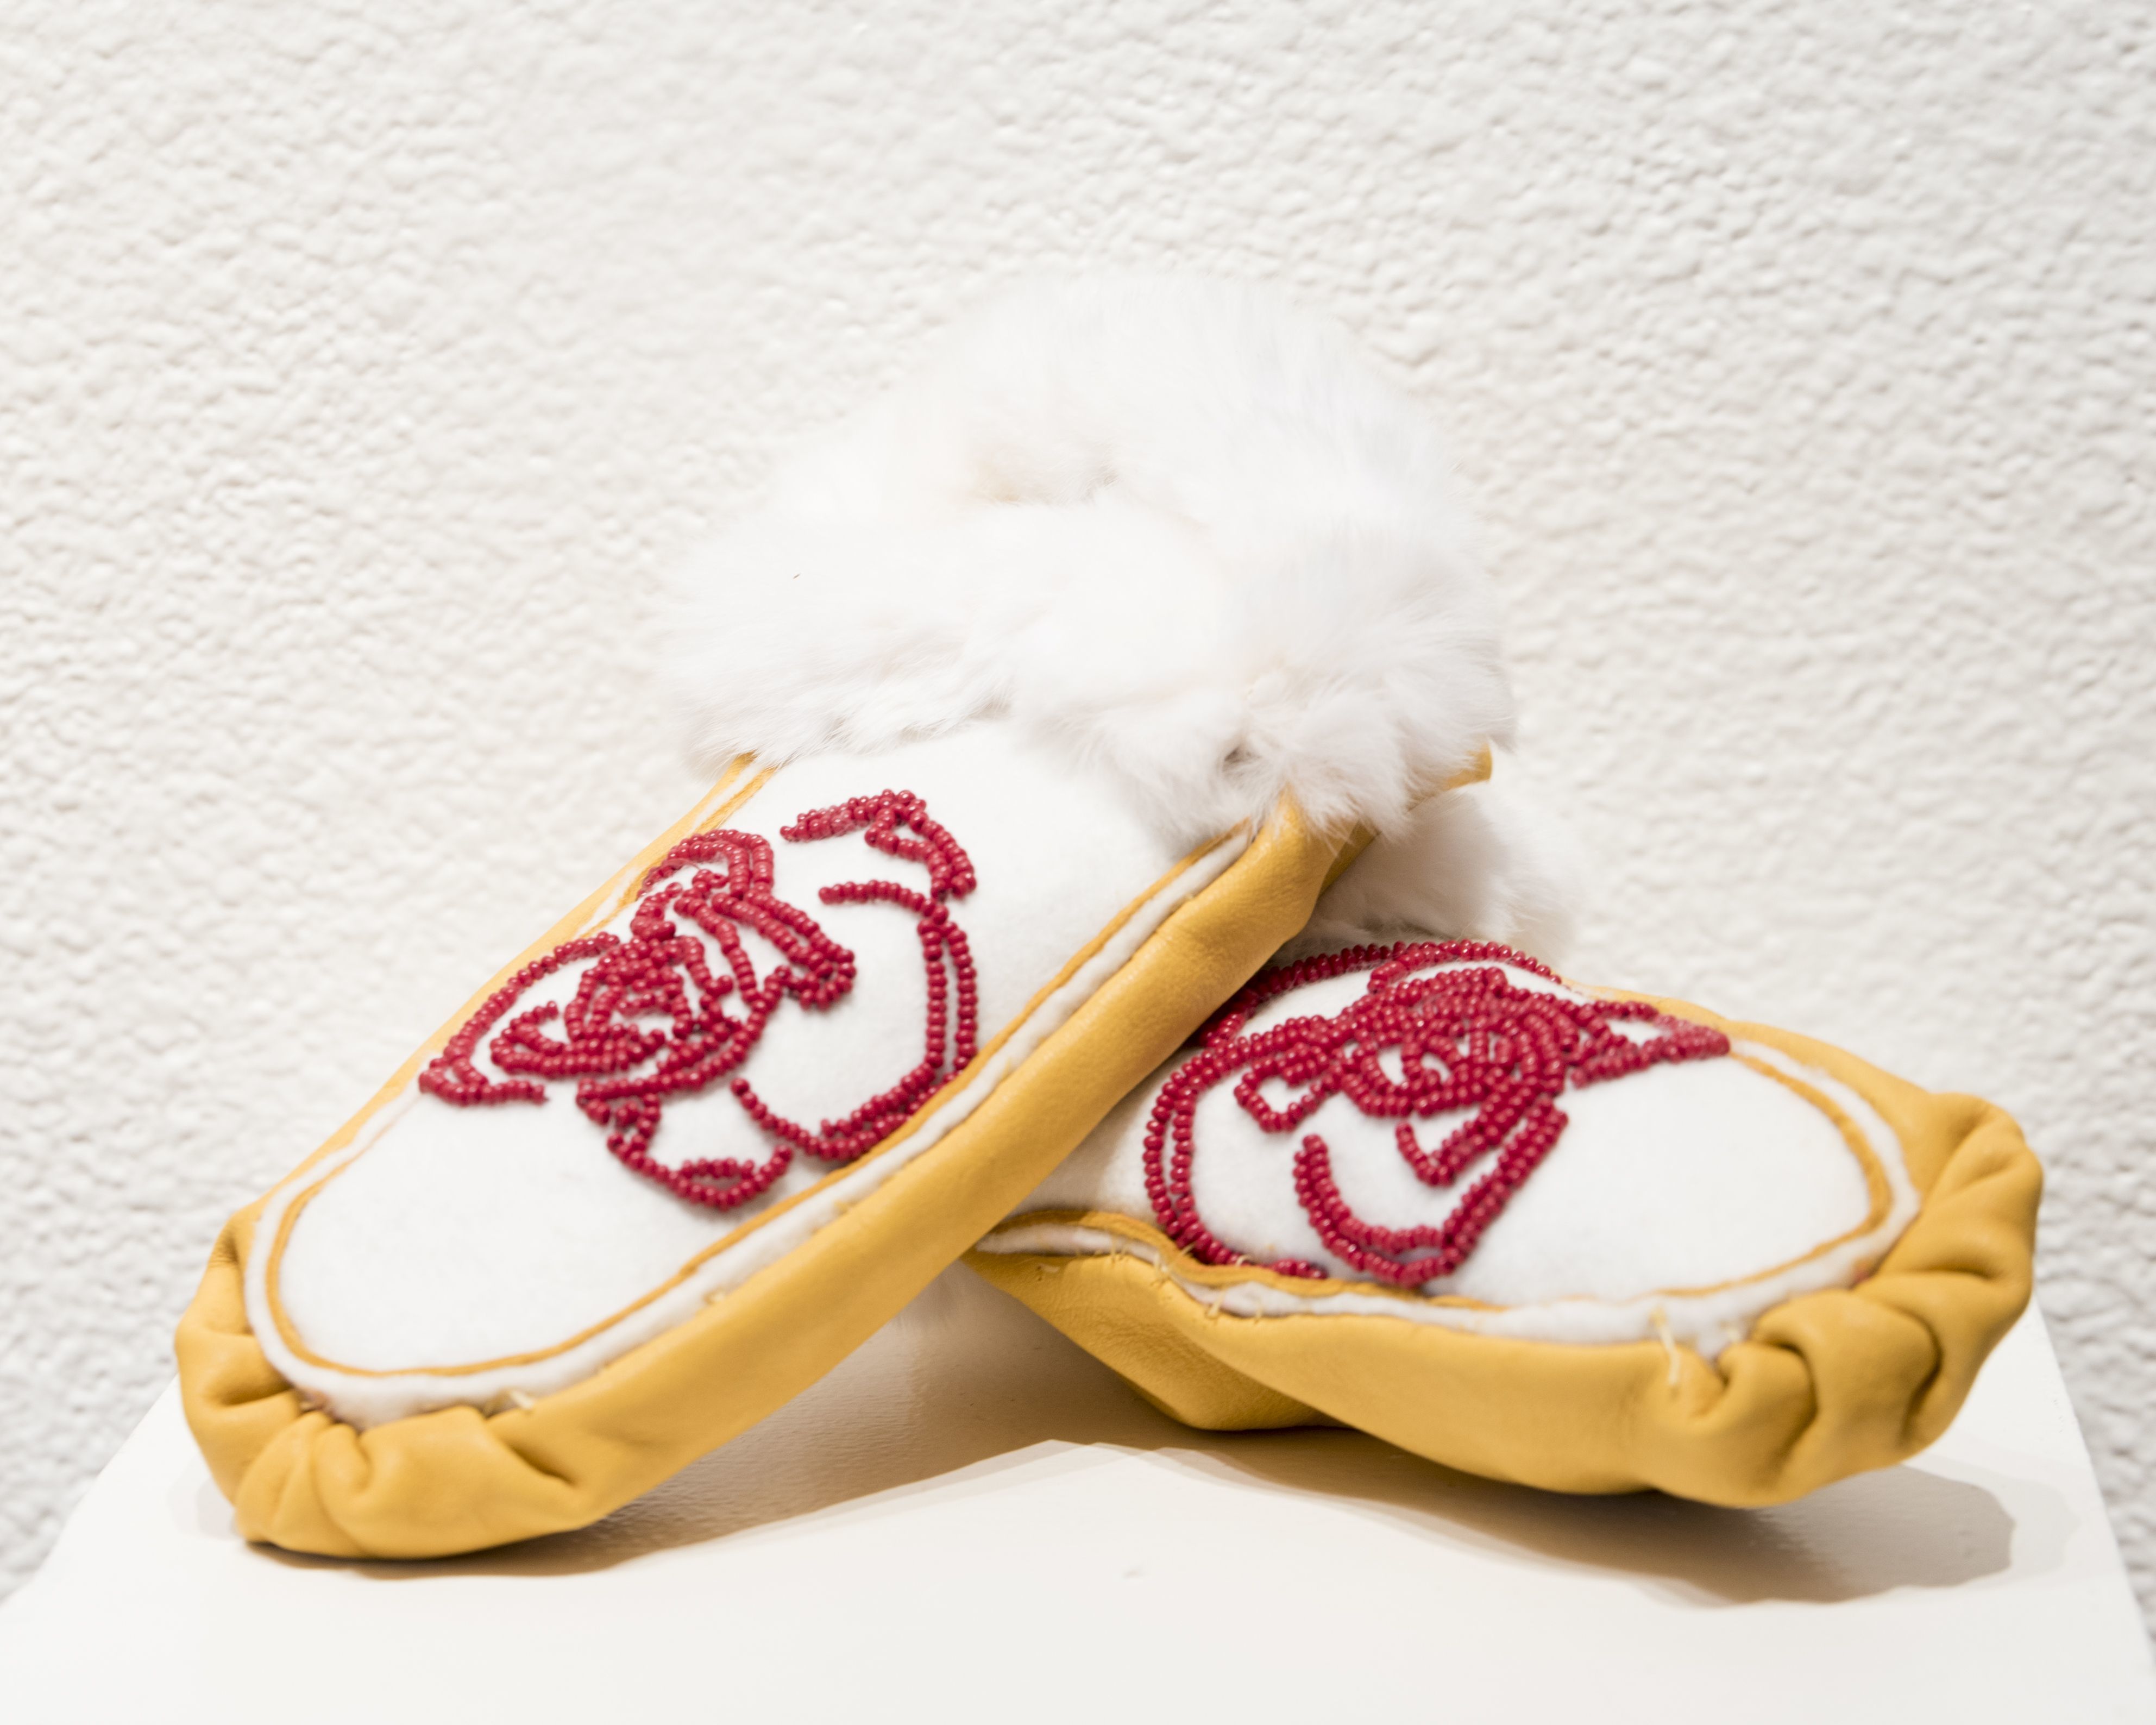 Silema Garcia - "Moccasins with Red Beaded Rose"